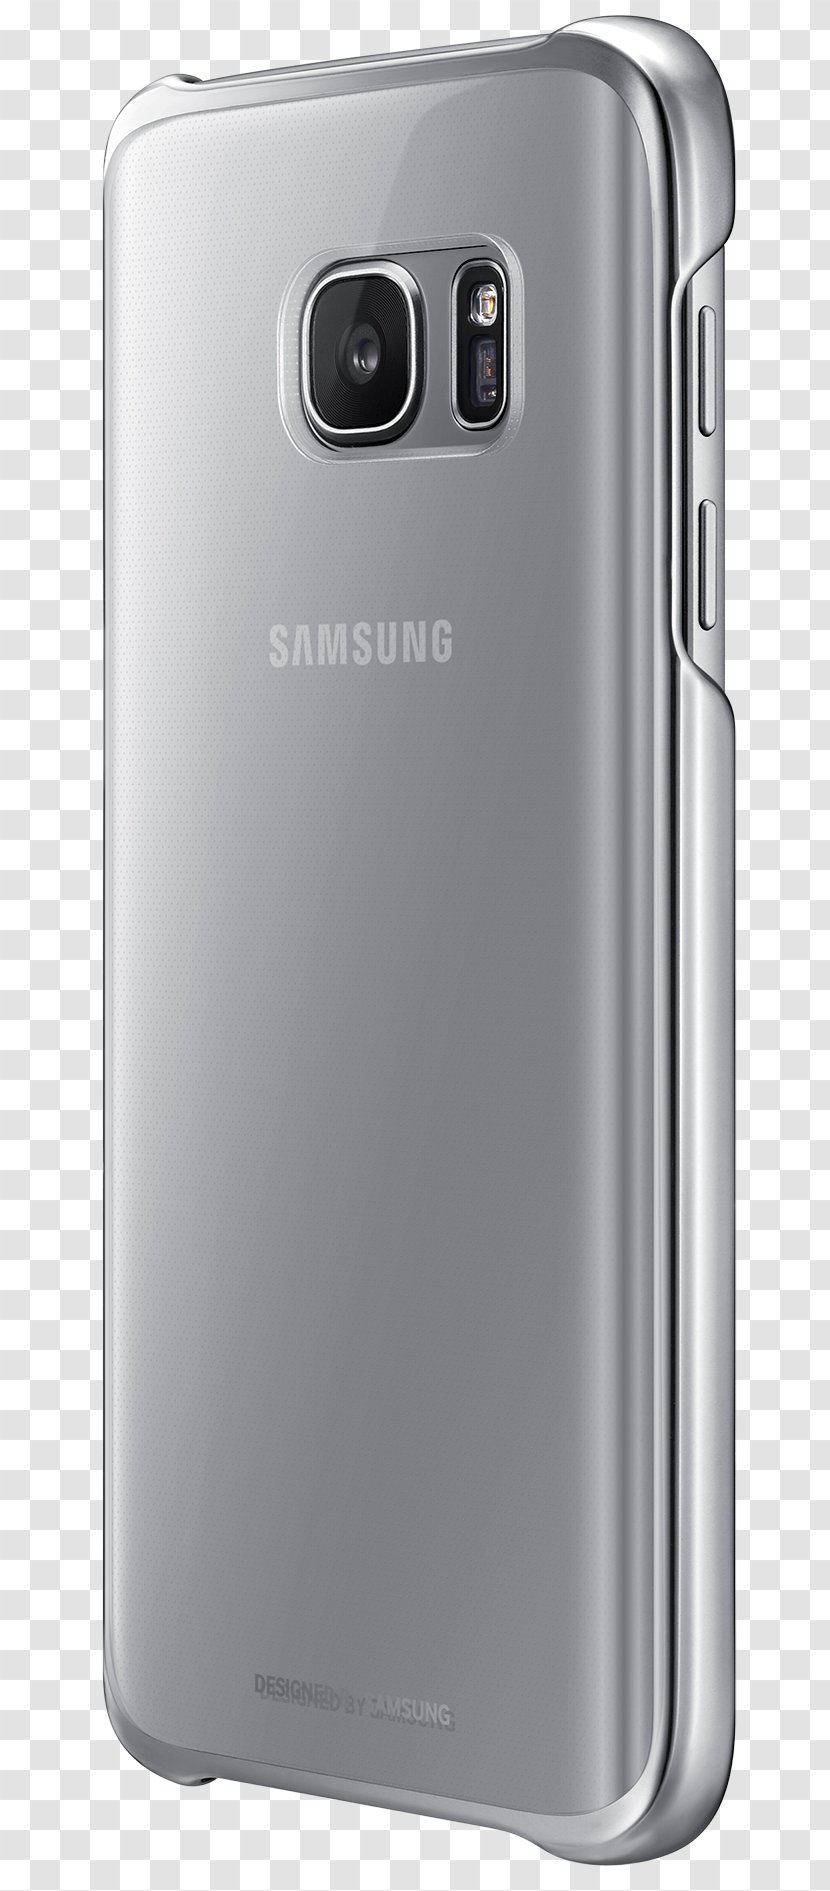 Samsung GALAXY S7 Edge Feature Phone Telephone Transparent PNG